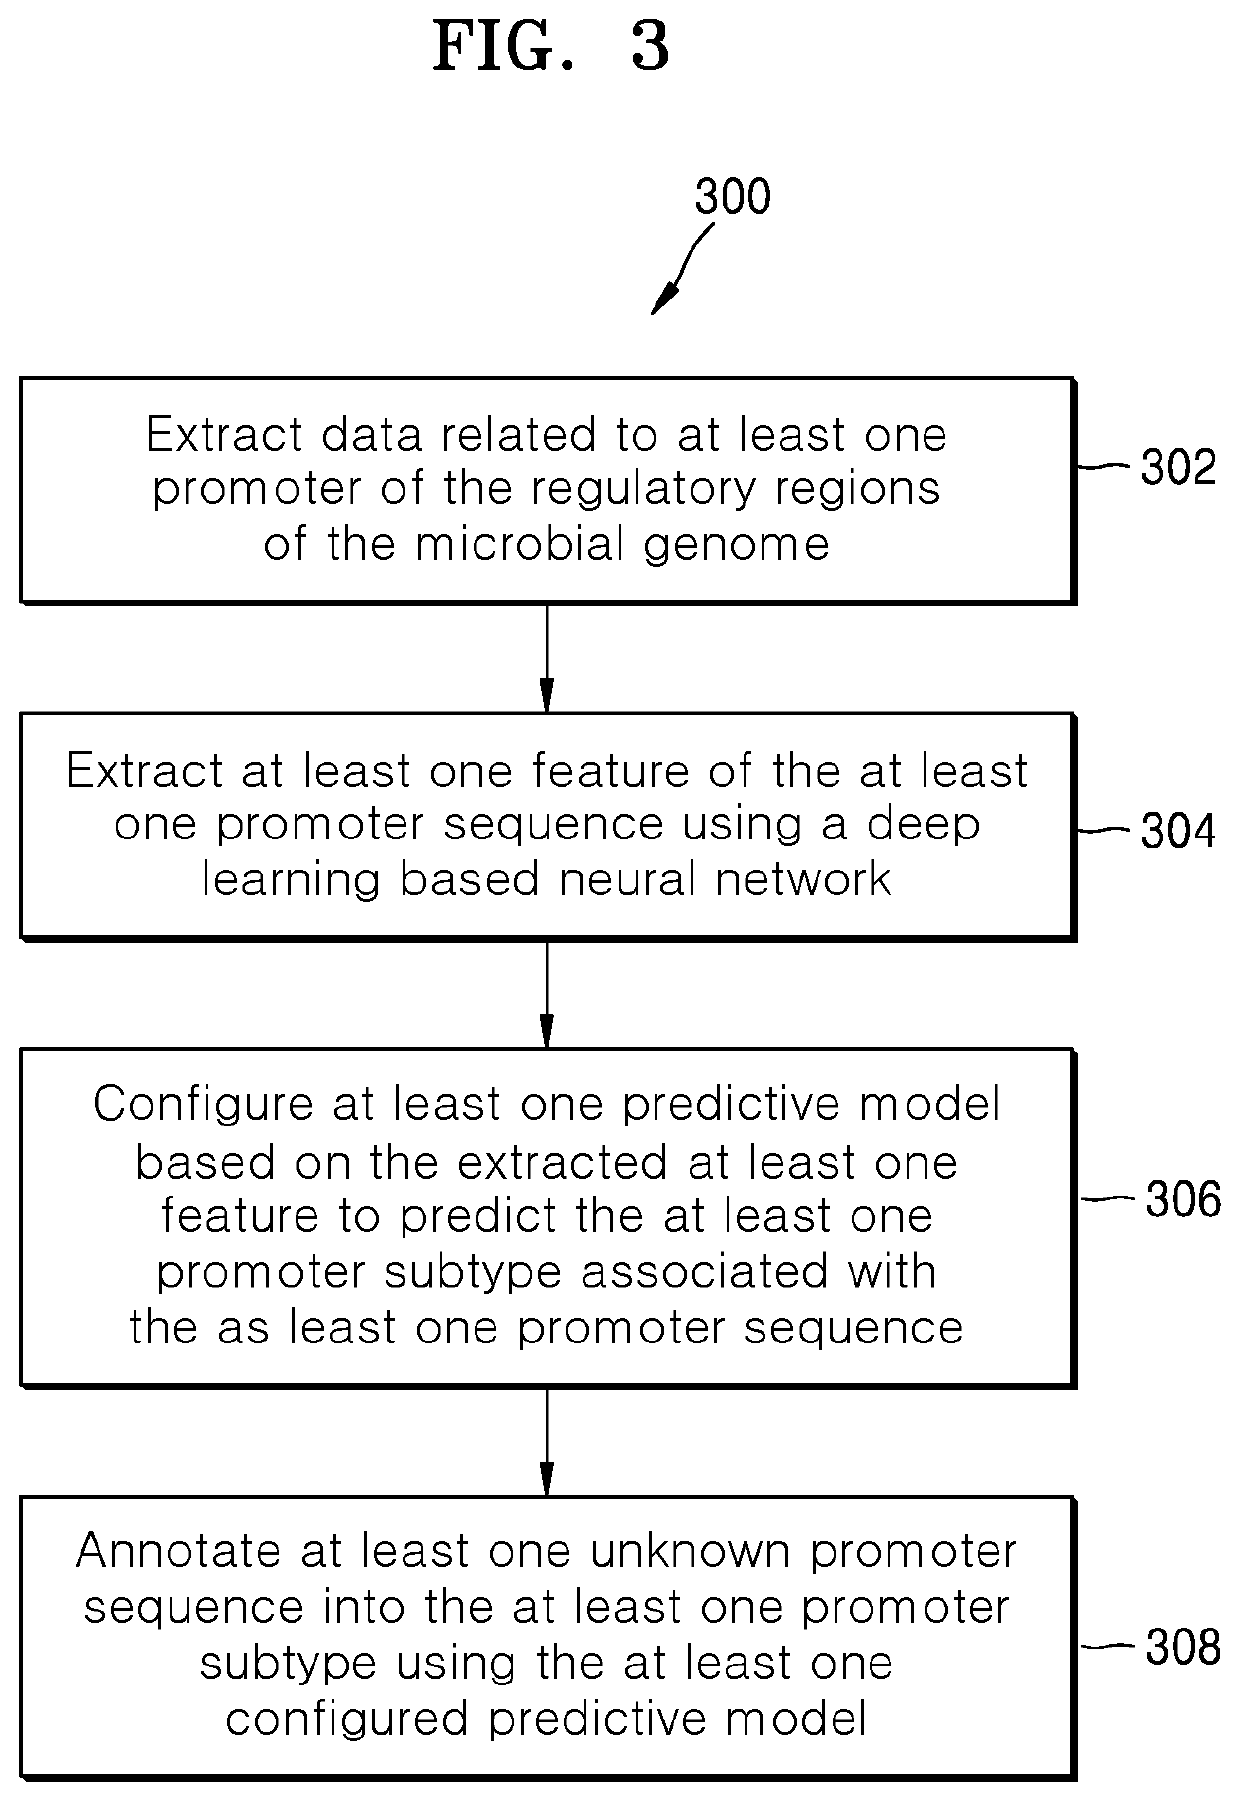 Methods and systems for annotating regulatory regions of a microbial genome